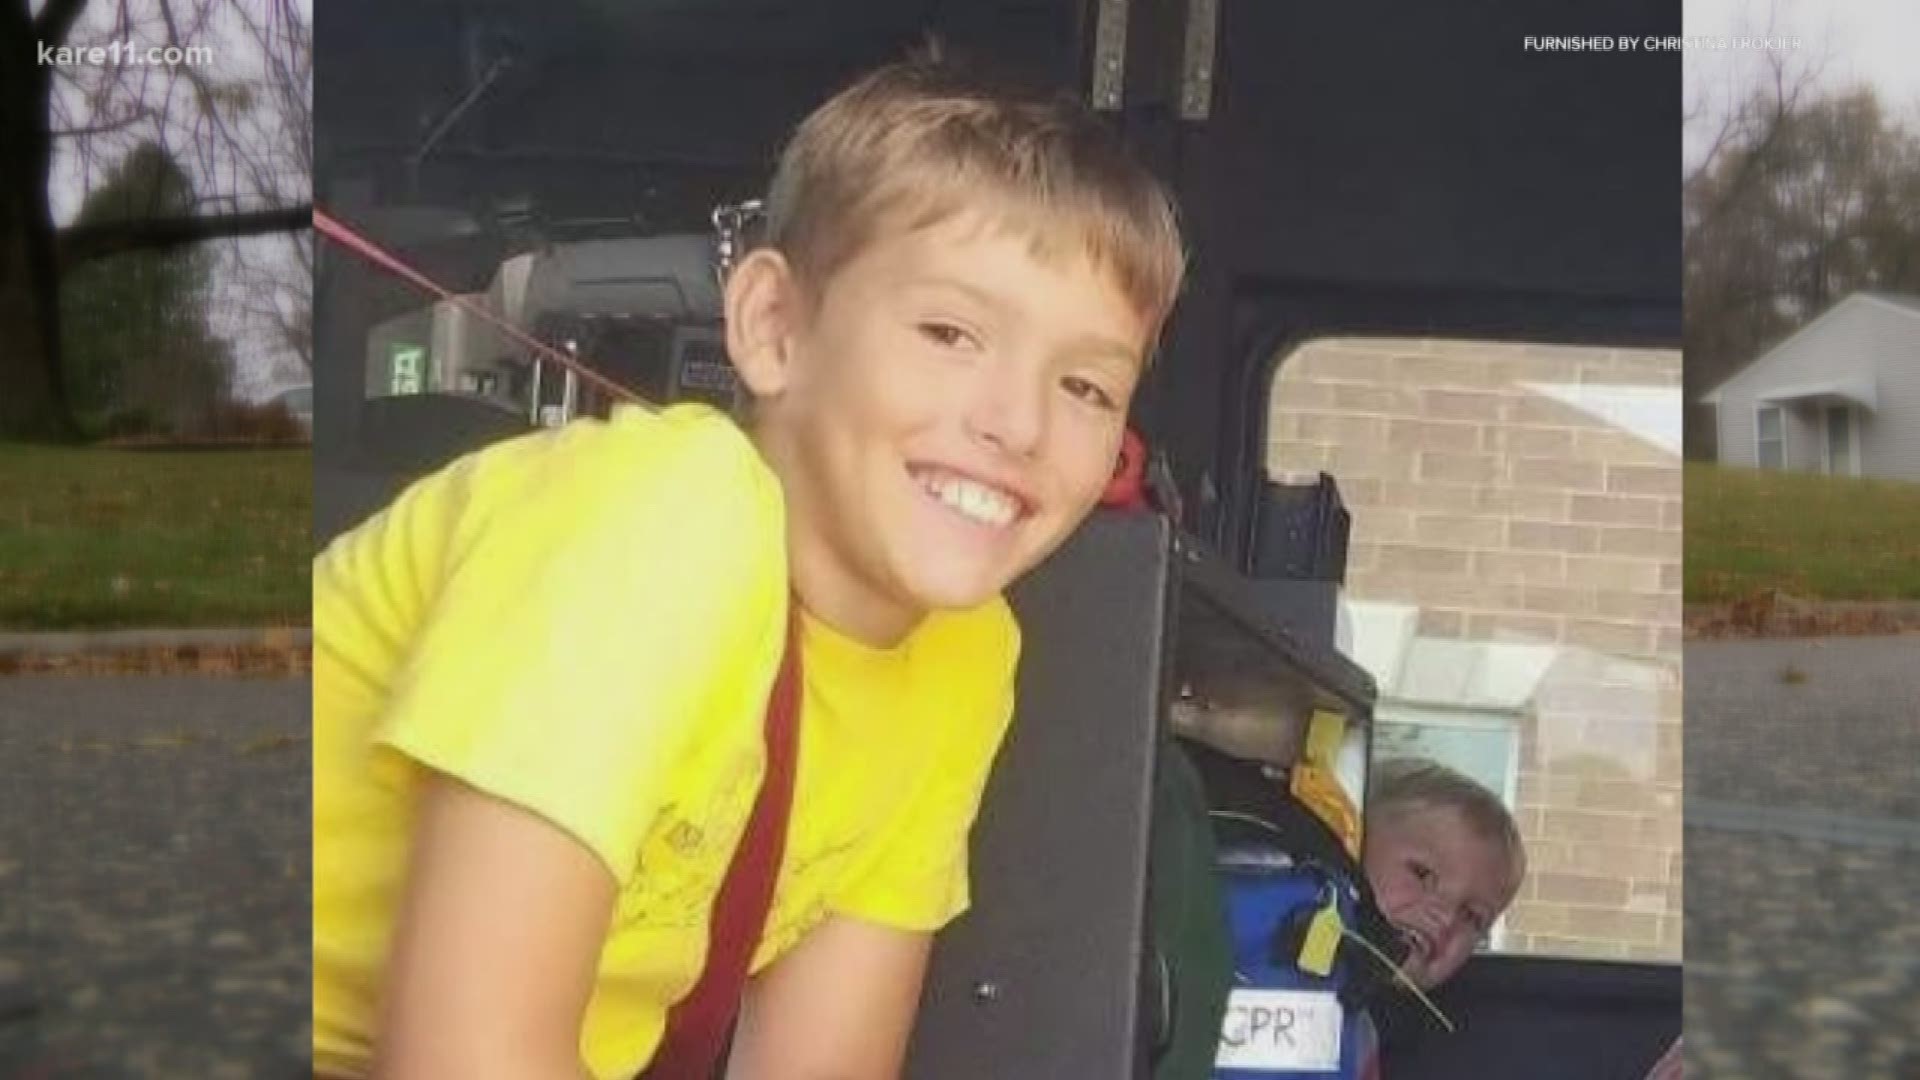 An 11-year-old boy is recovering from serious bite wounds after being attacked by two pit bulls when he got off the school bus Monday afternoon.